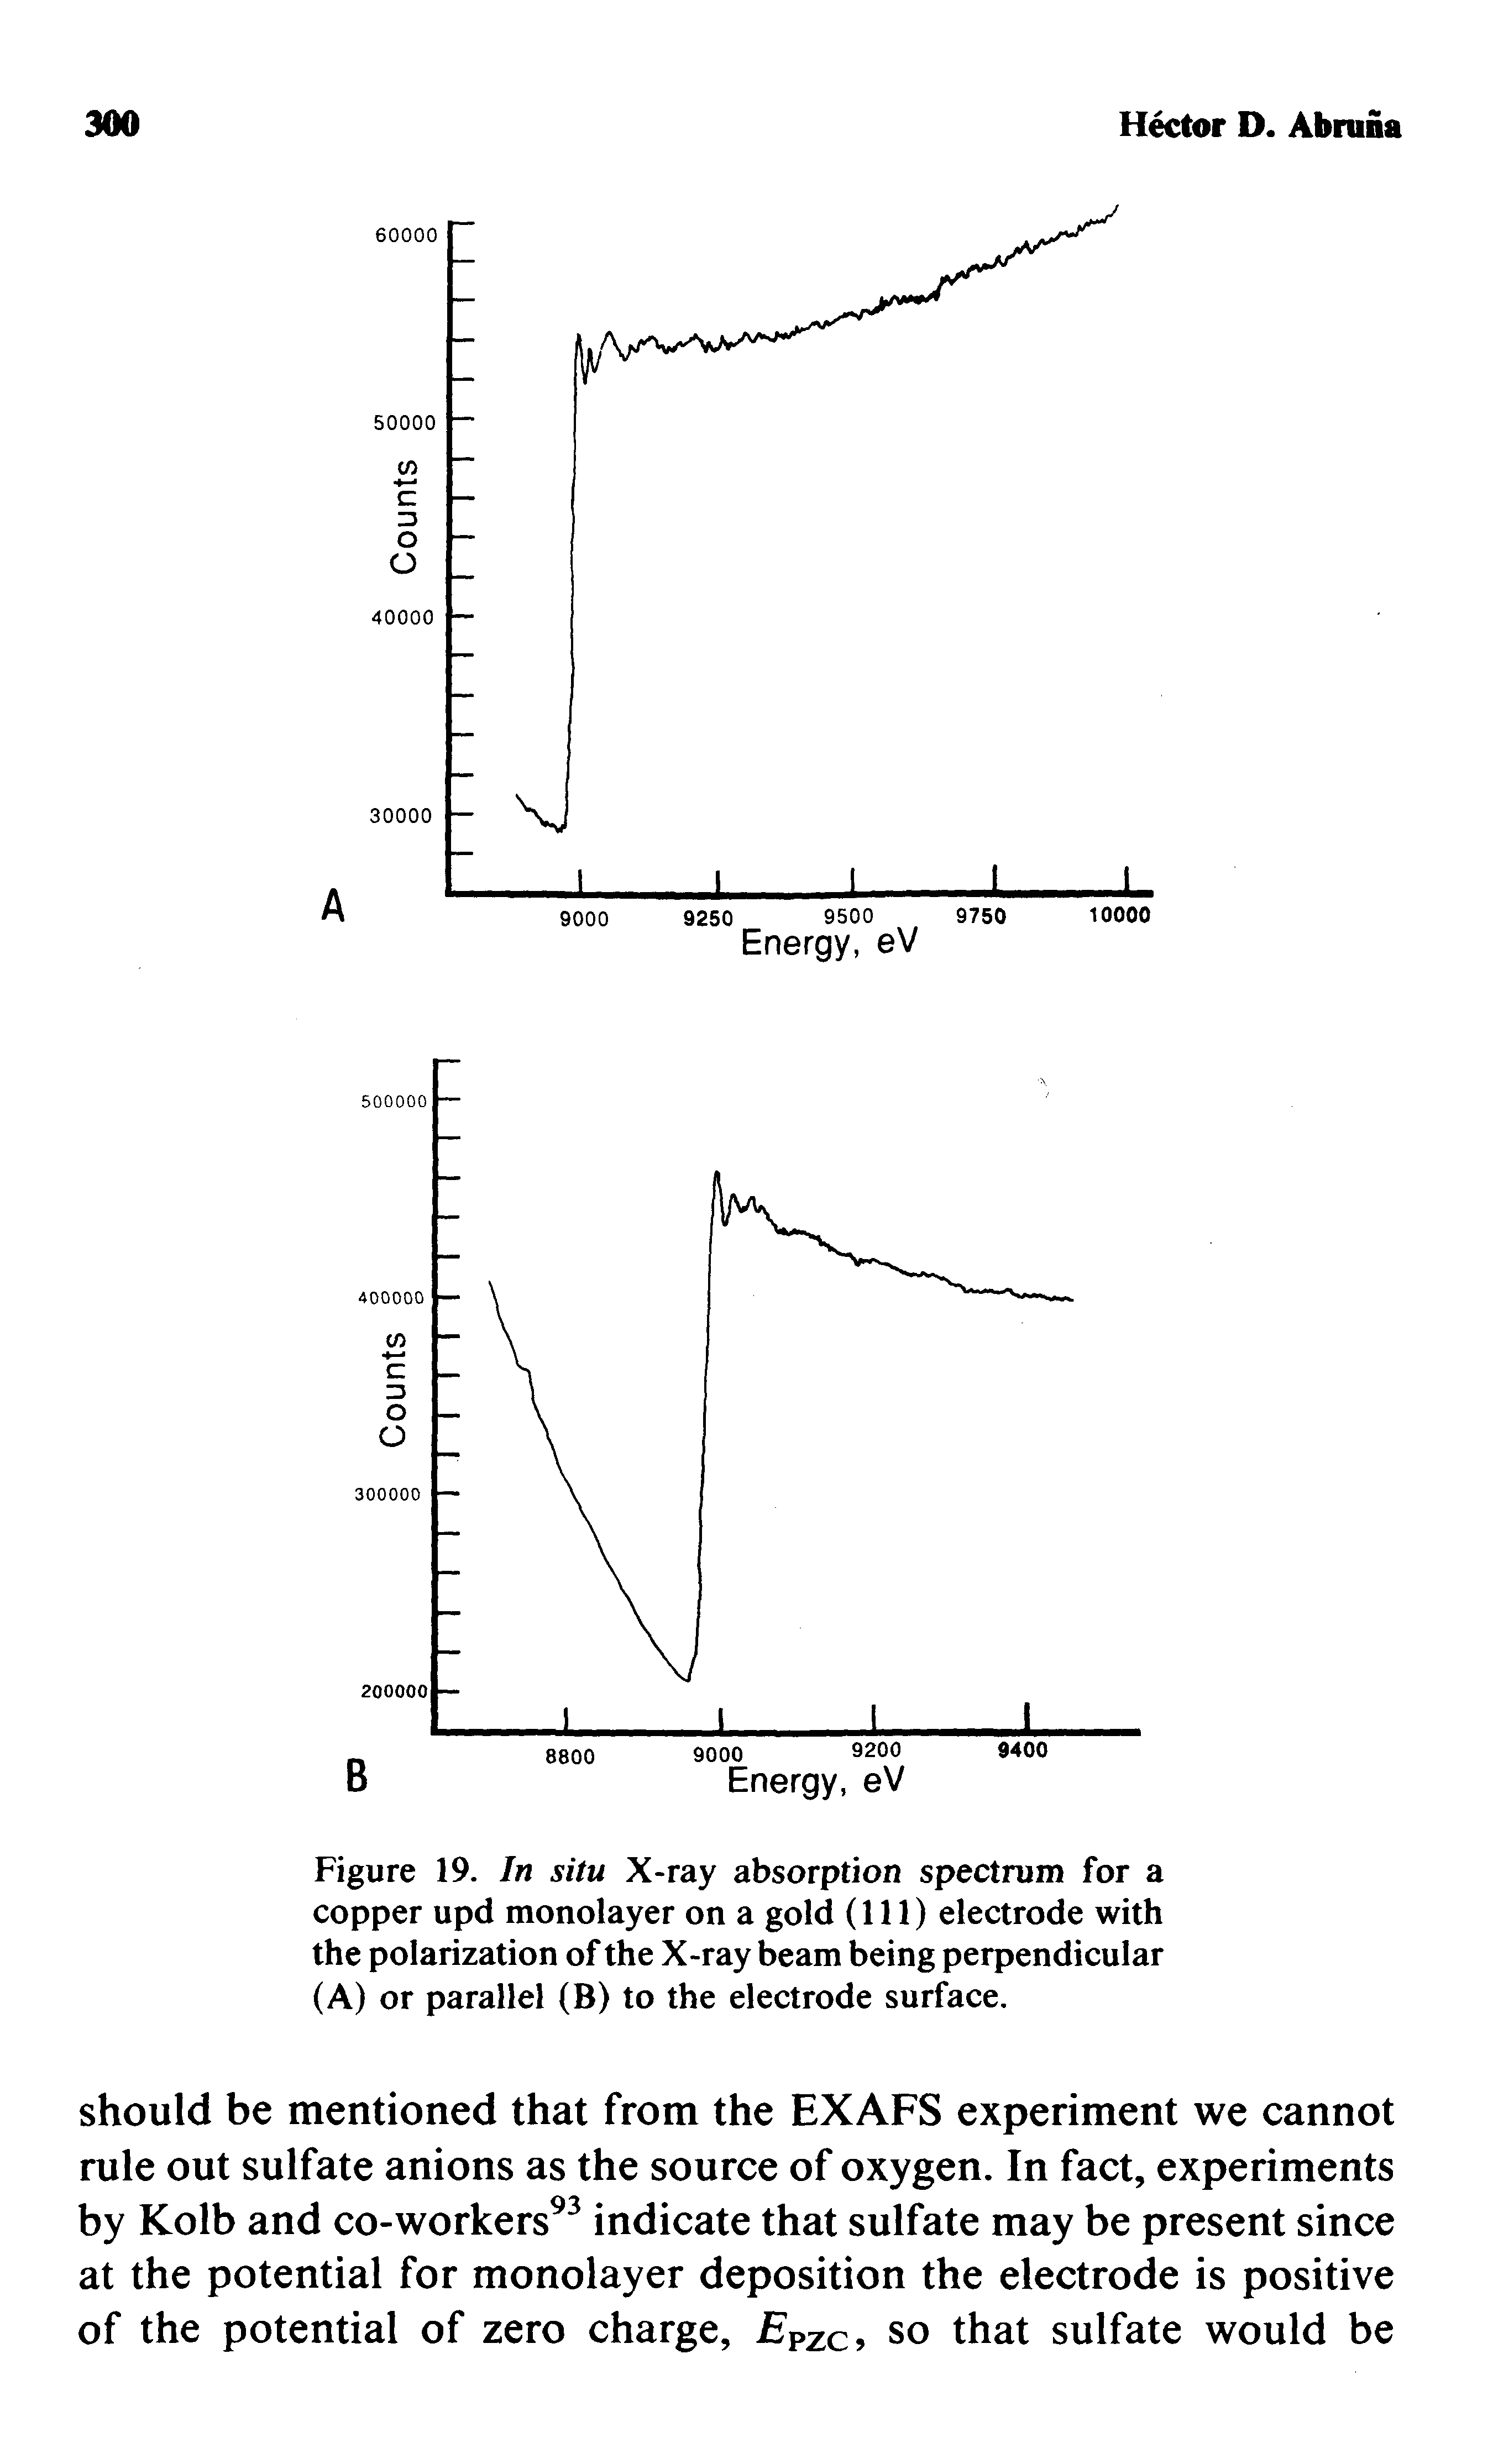 Figure 19. In situ X-ray absorption spectrum for a copper upd monolayer on a gold (111) electrode with the polarization of the X-ray beam being perpendicular (A) or parallel (B) to the electrode surface.